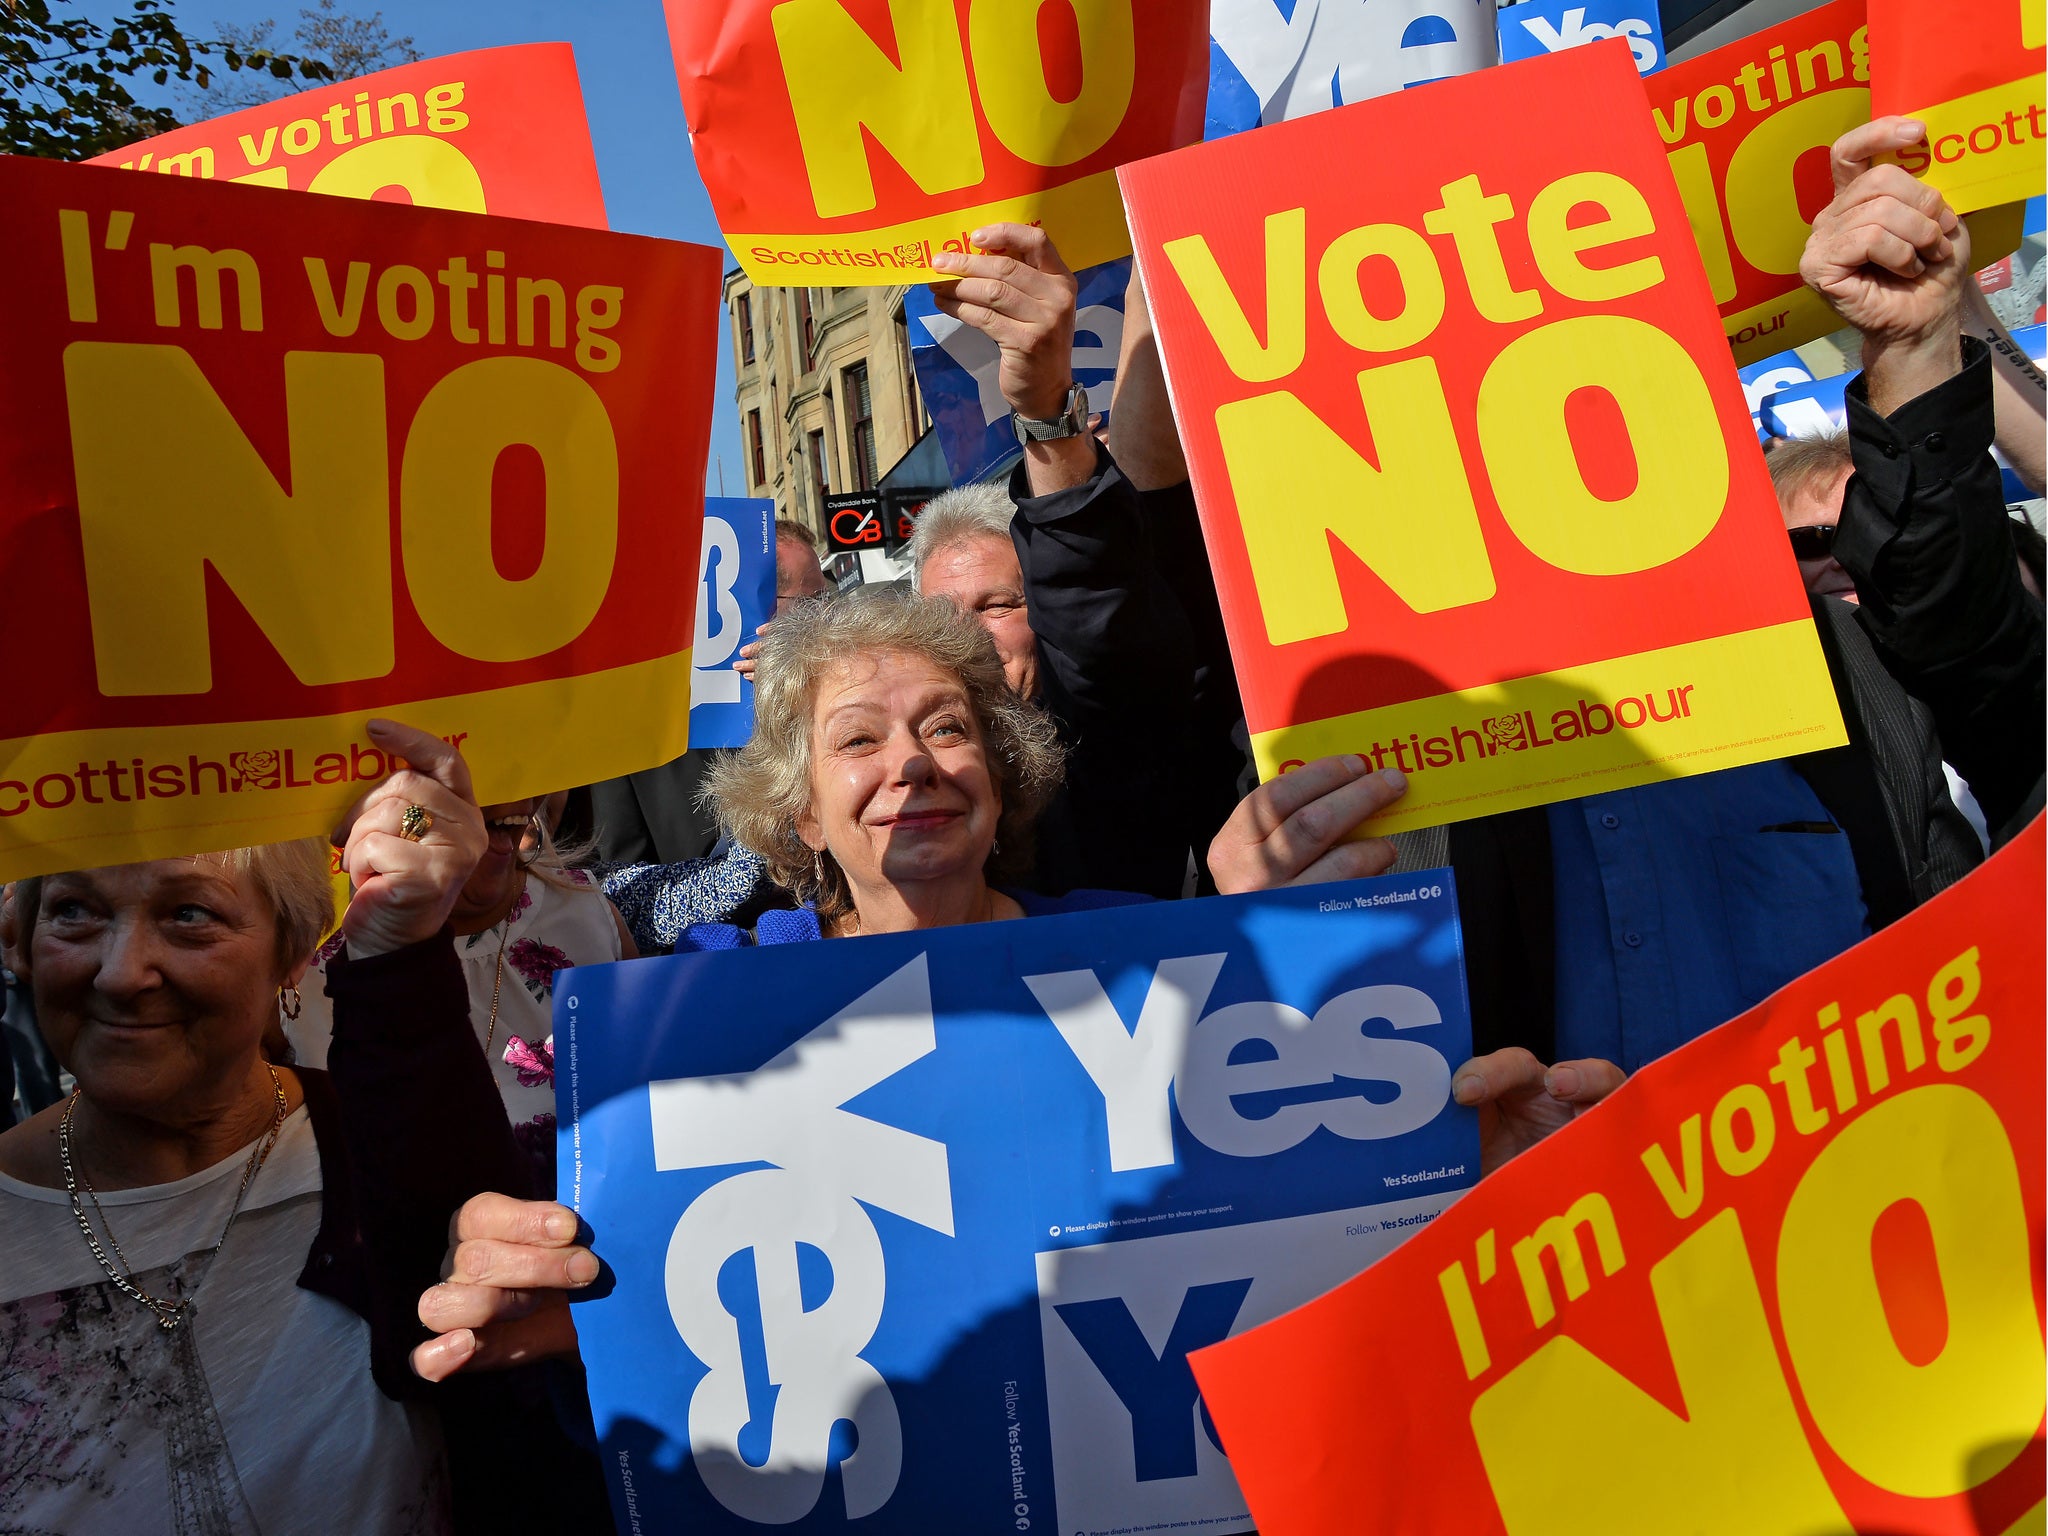 The 2014 referendum saw Scotland vote no to independence